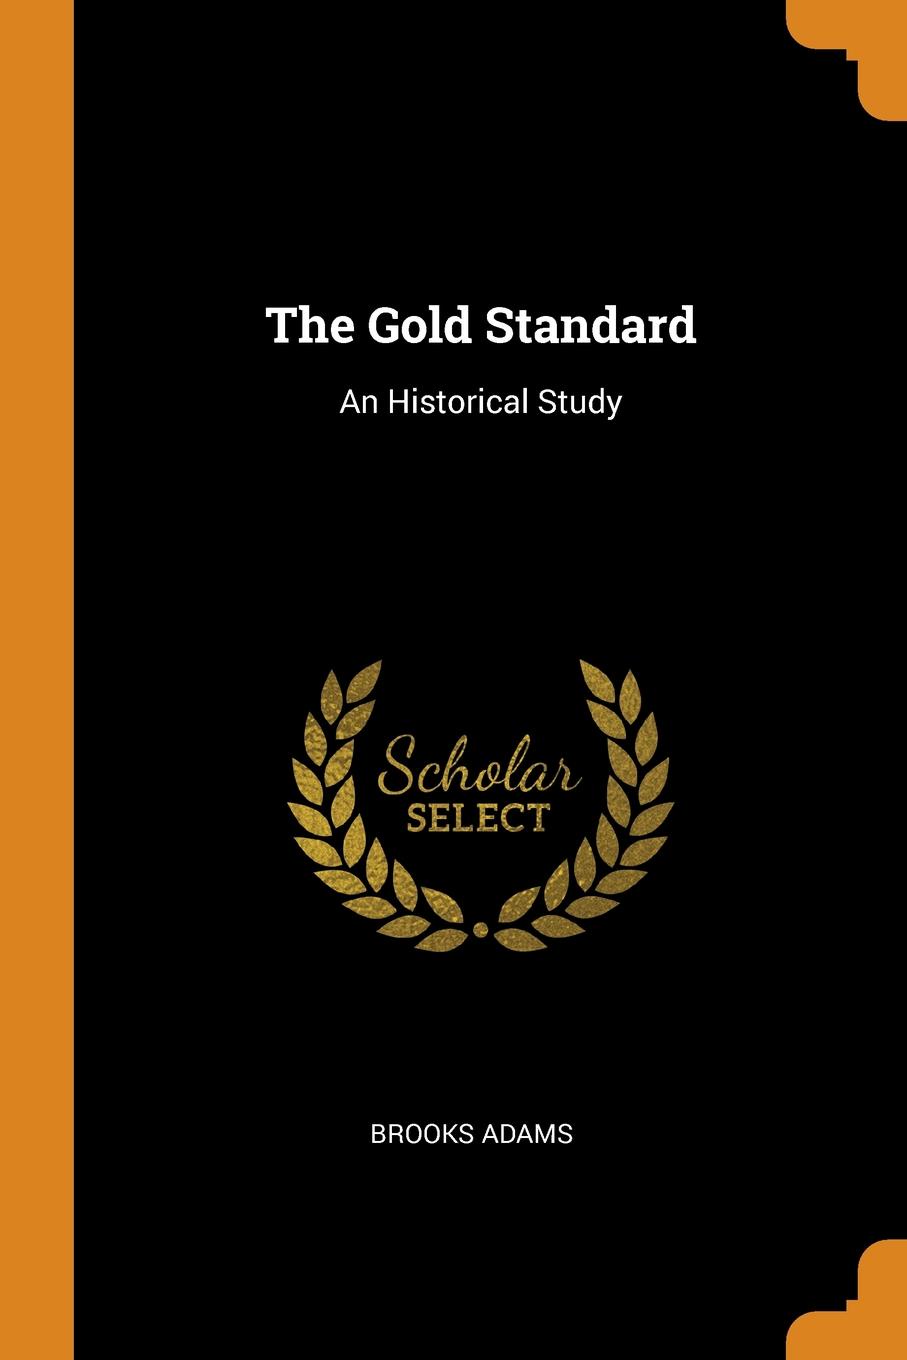 The Gold Standard. An Historical Study